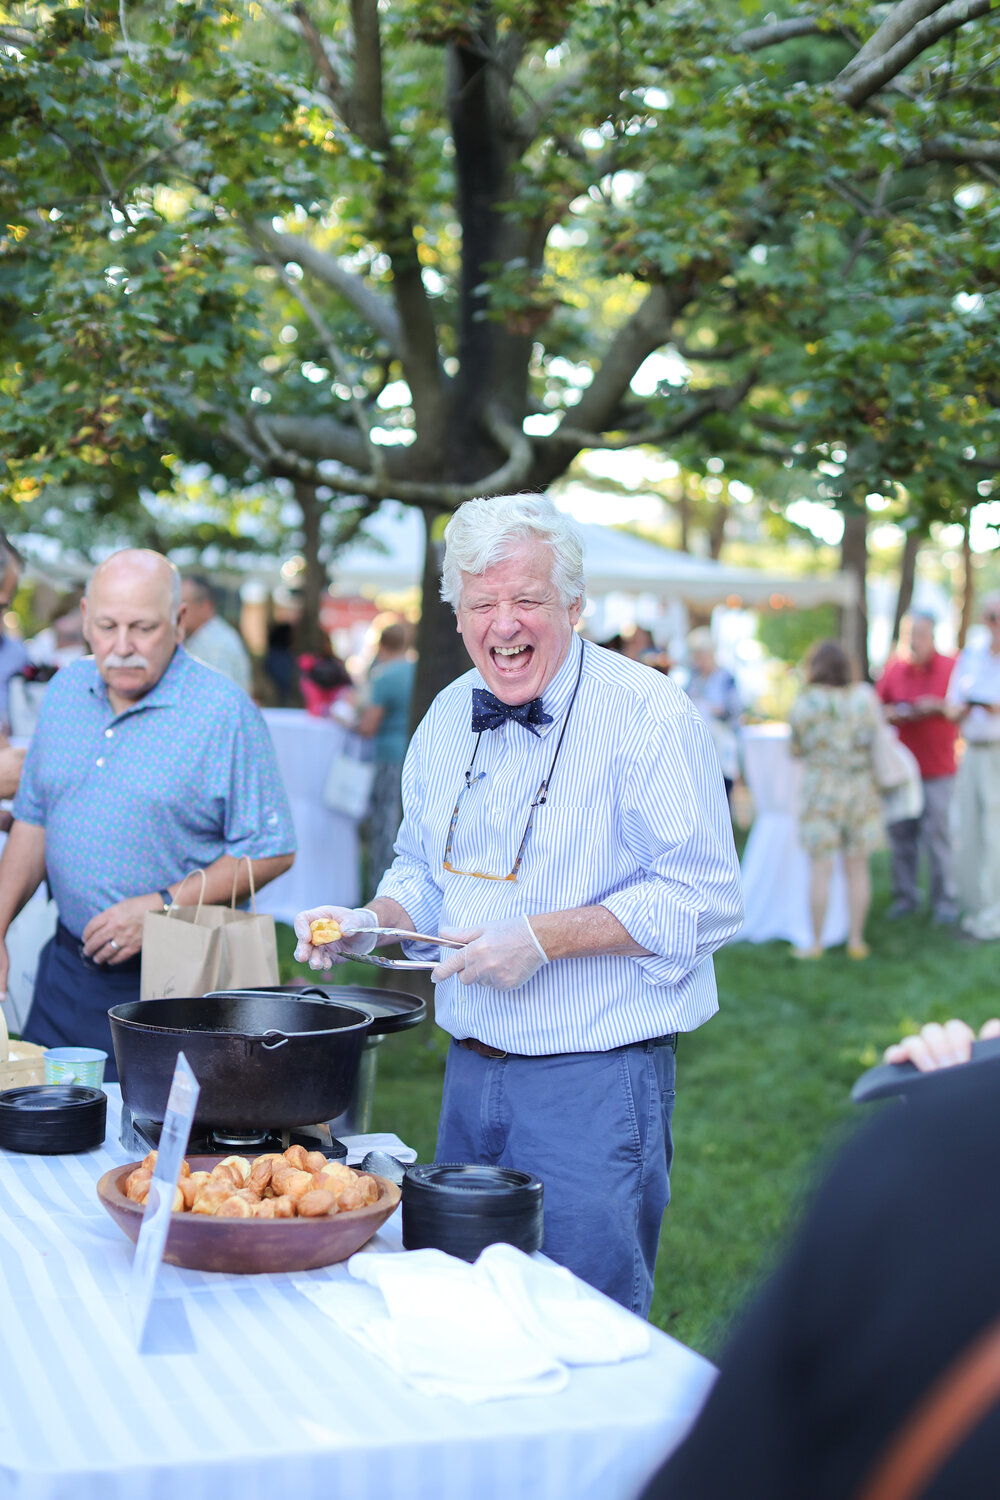 The Little Sisters of the Poor hosted a Summer Soirée on August 23. The event, which took place at the Jeanne Jugan Residence, was held to support the sisters’ ministry of caring for the elderly poor in Rhode Island. The event featured small bites and beverages from area restaurants in a delightful garden setting.